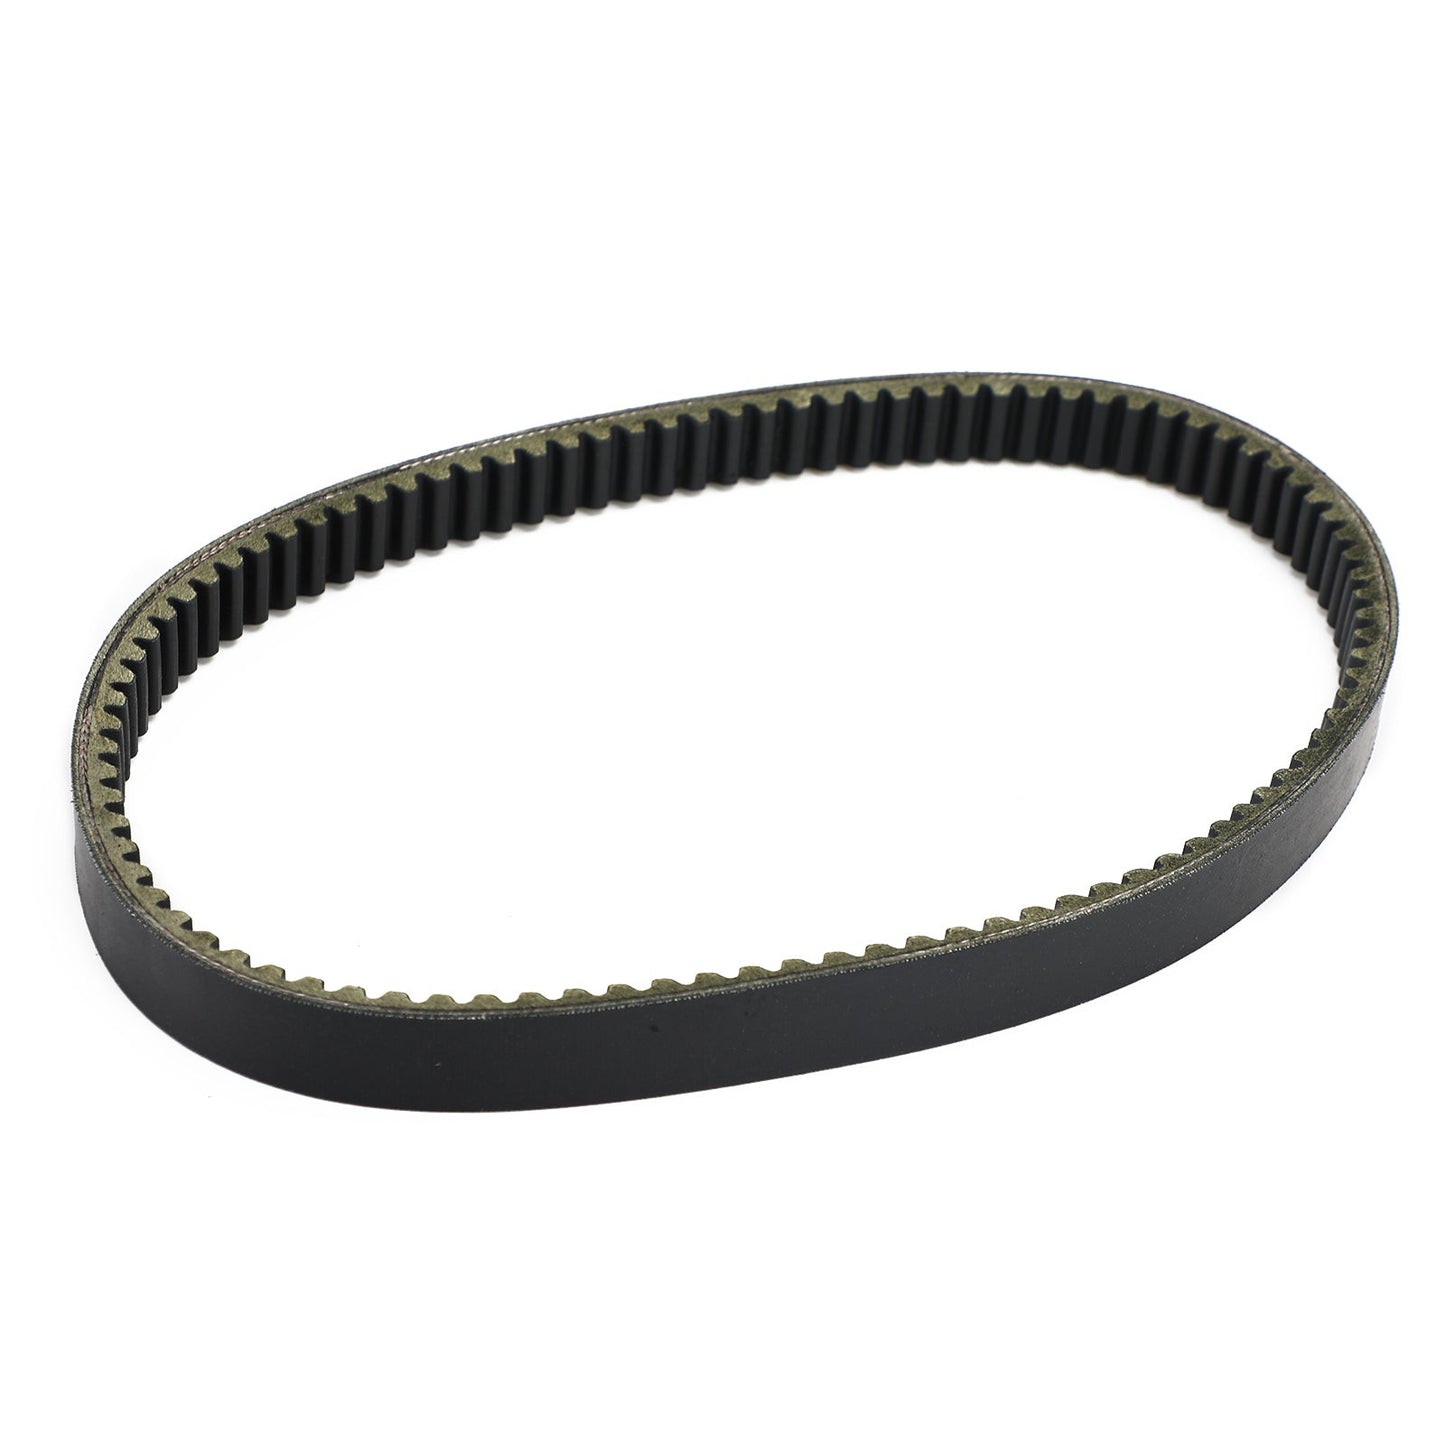 Final Drive Transmission Belt Fit for Yamaha XC155 SMAX S-Max 155 2015-2020